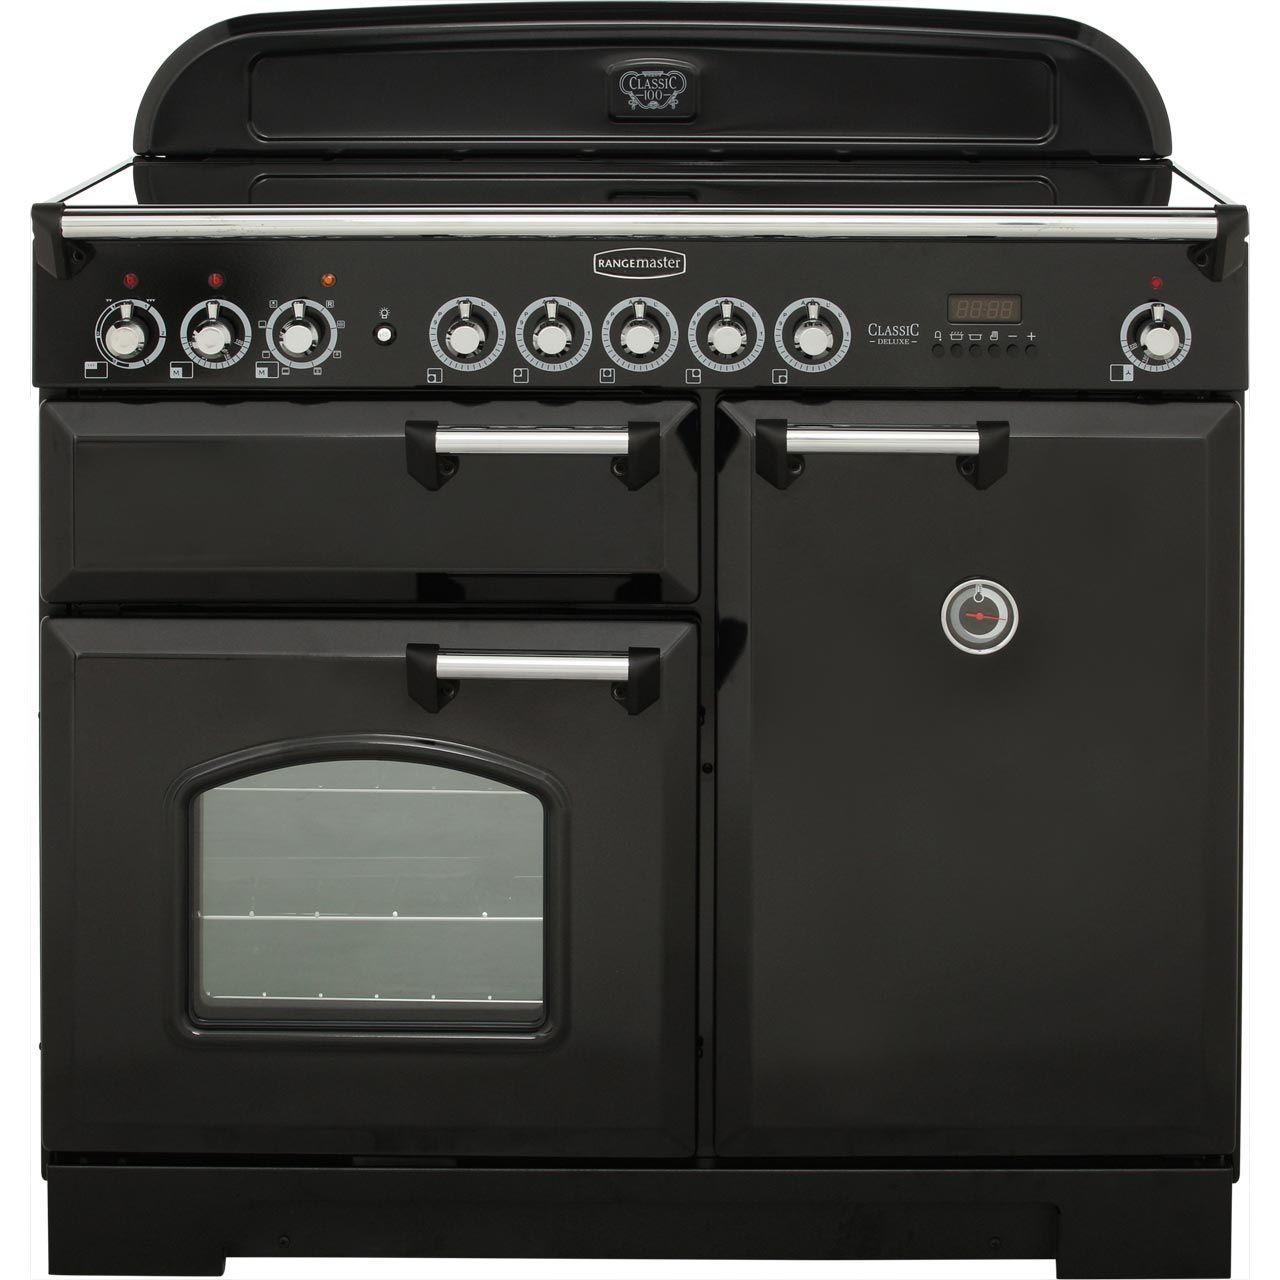 Rangemaster Classic Deluxe CDL100EIBL/C 100cm Electric Range Cooker with Induction Hob - Black / Chrome - A/A Rated, Black